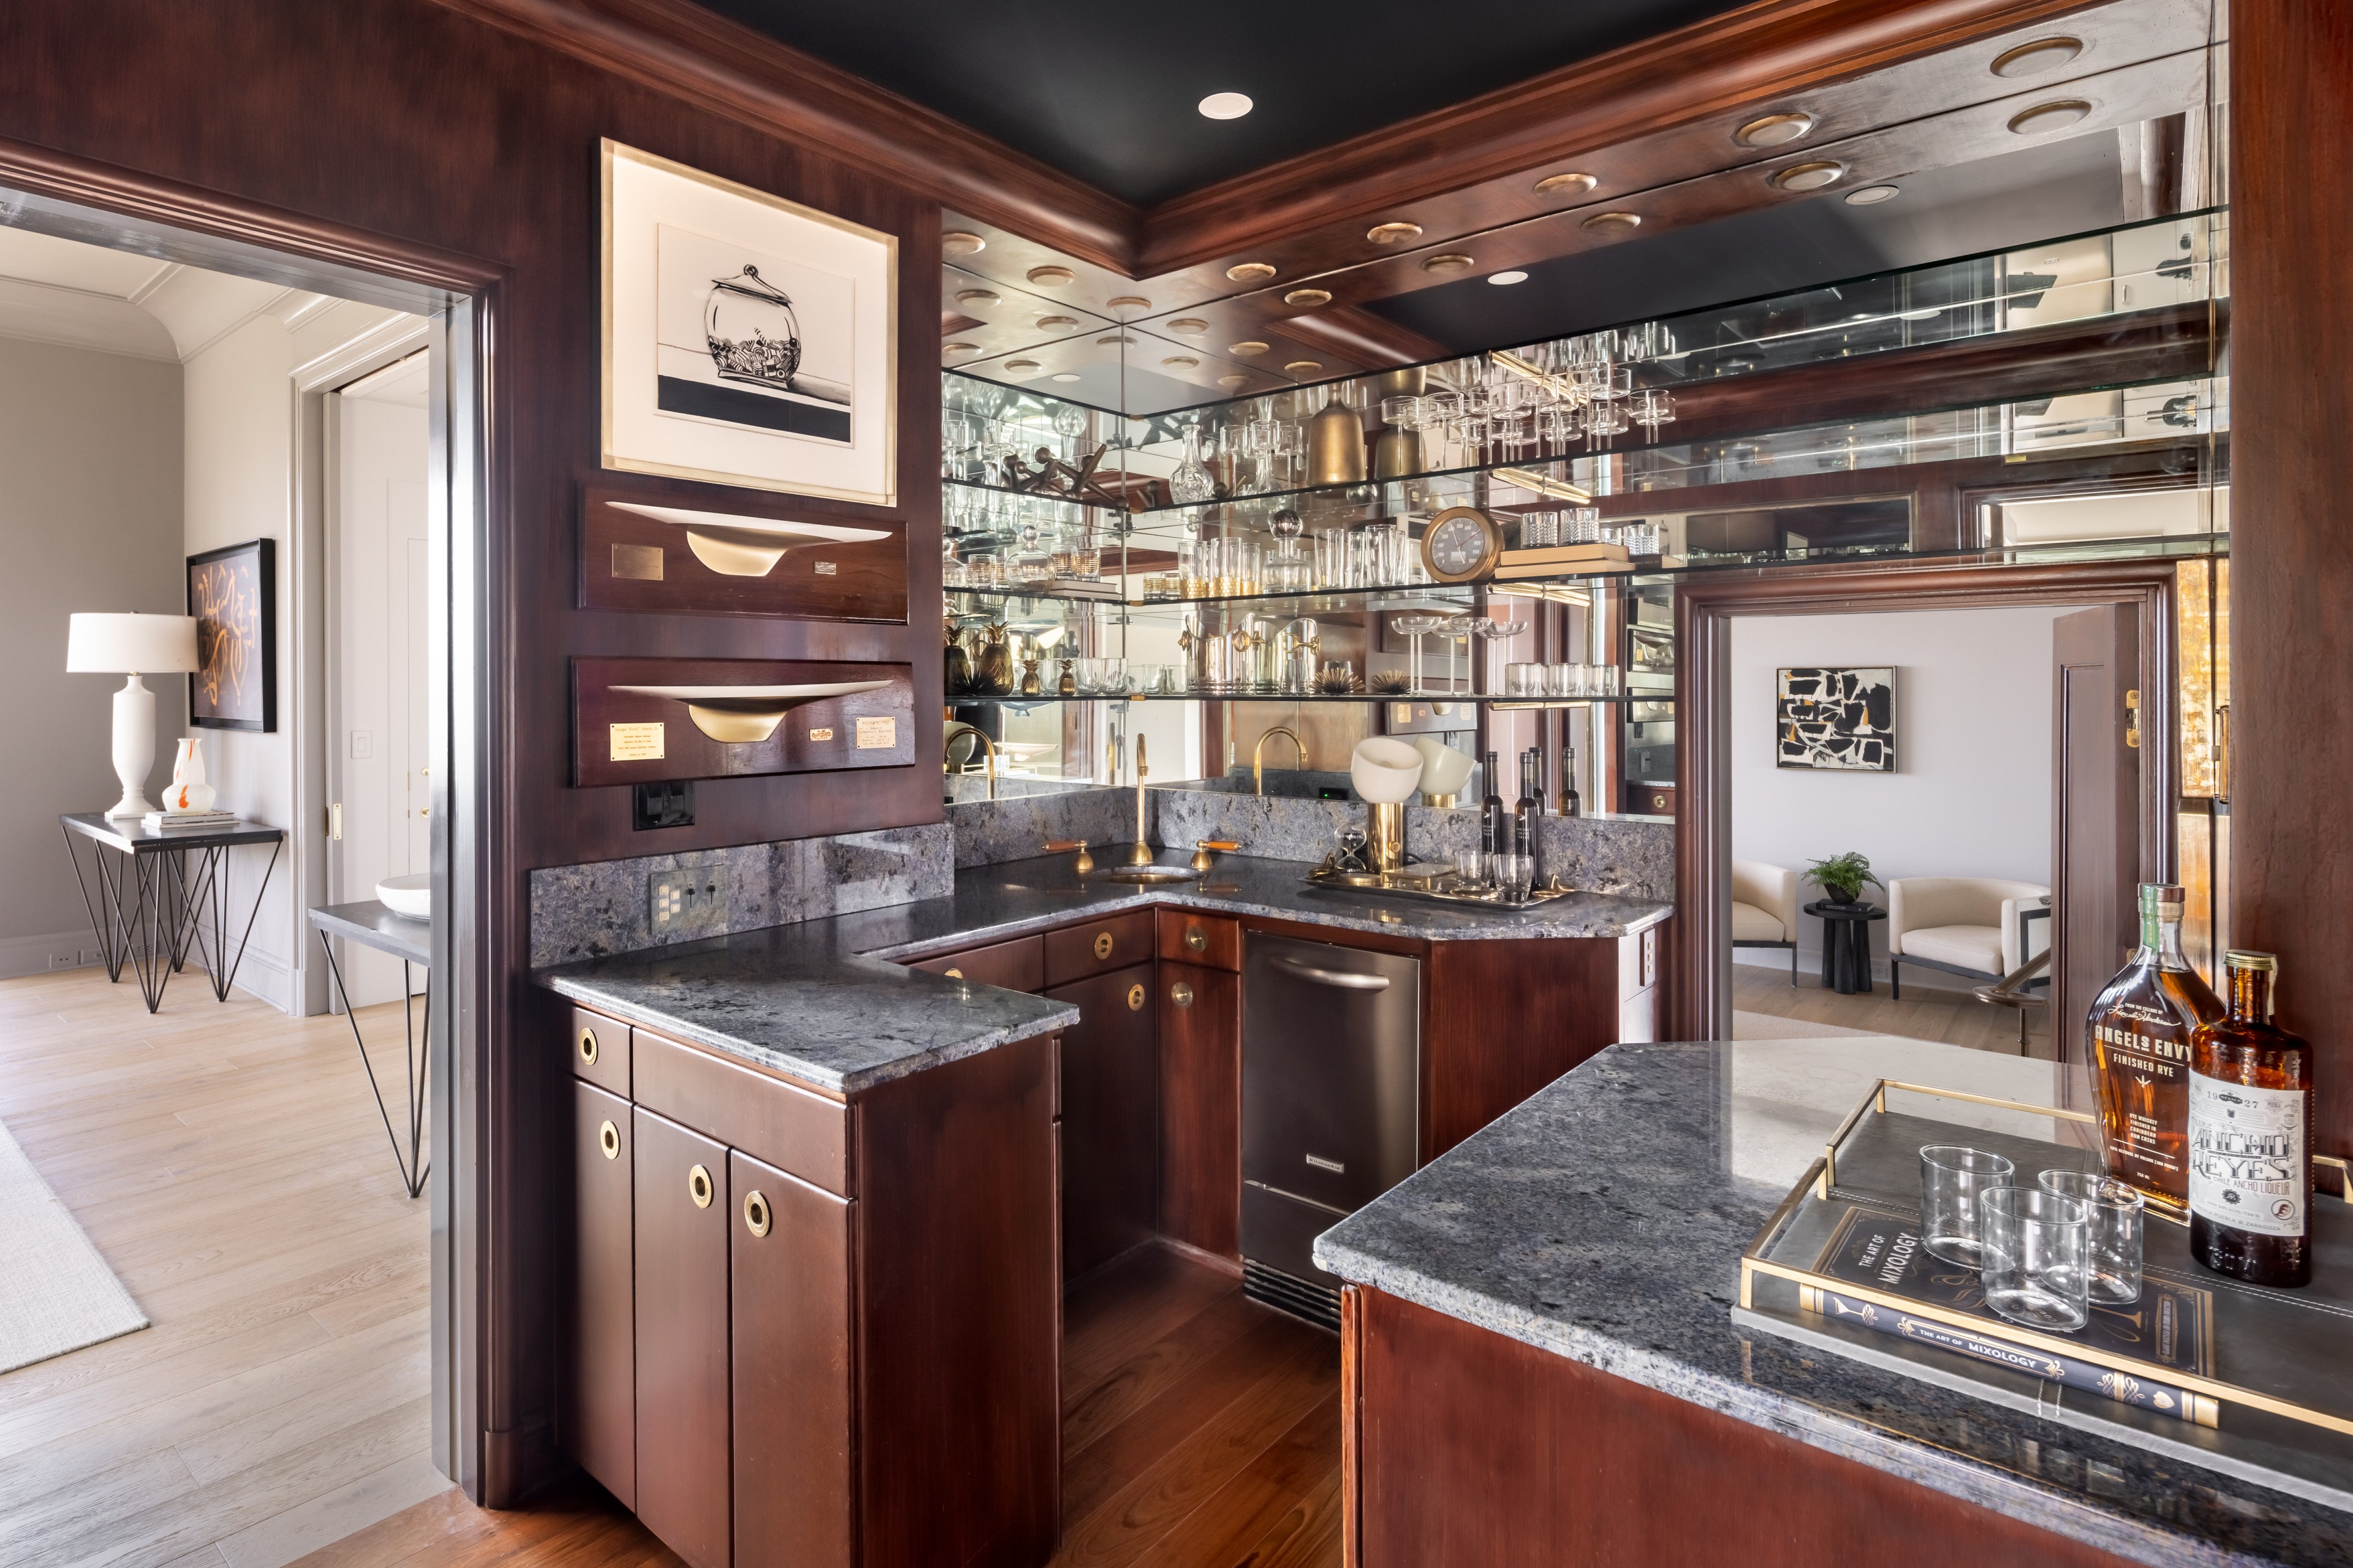 This image depicts an elegant, wood-paneled home bar with granite countertops, mirrored shelving filled with glassware, and modern decor leading to a bright living area.